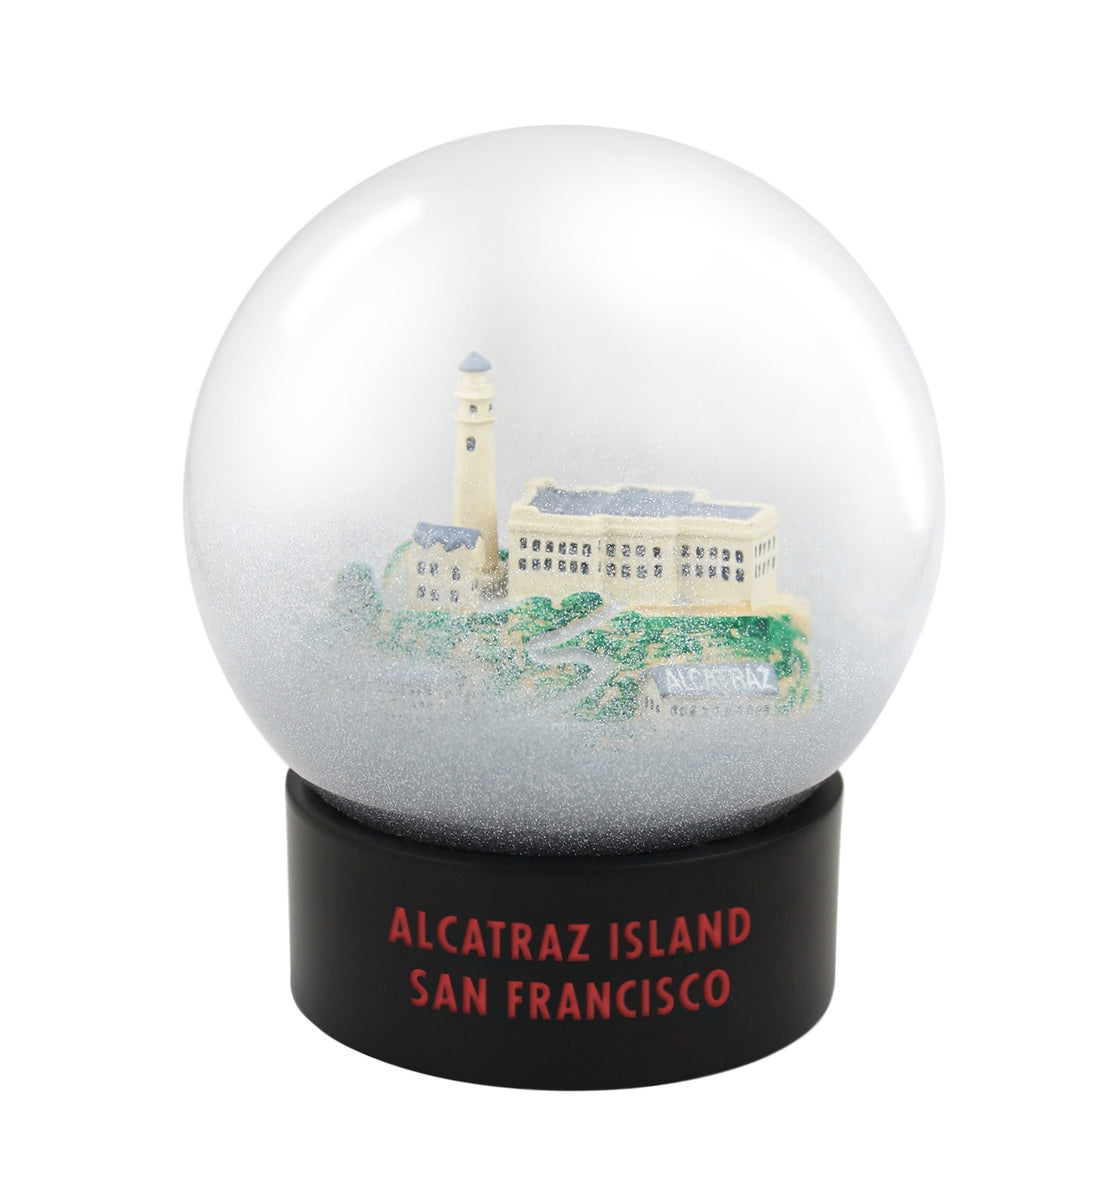 Alcatraz Fog Globe, designed and produced by the Golden Gate National Parks Conservancy.